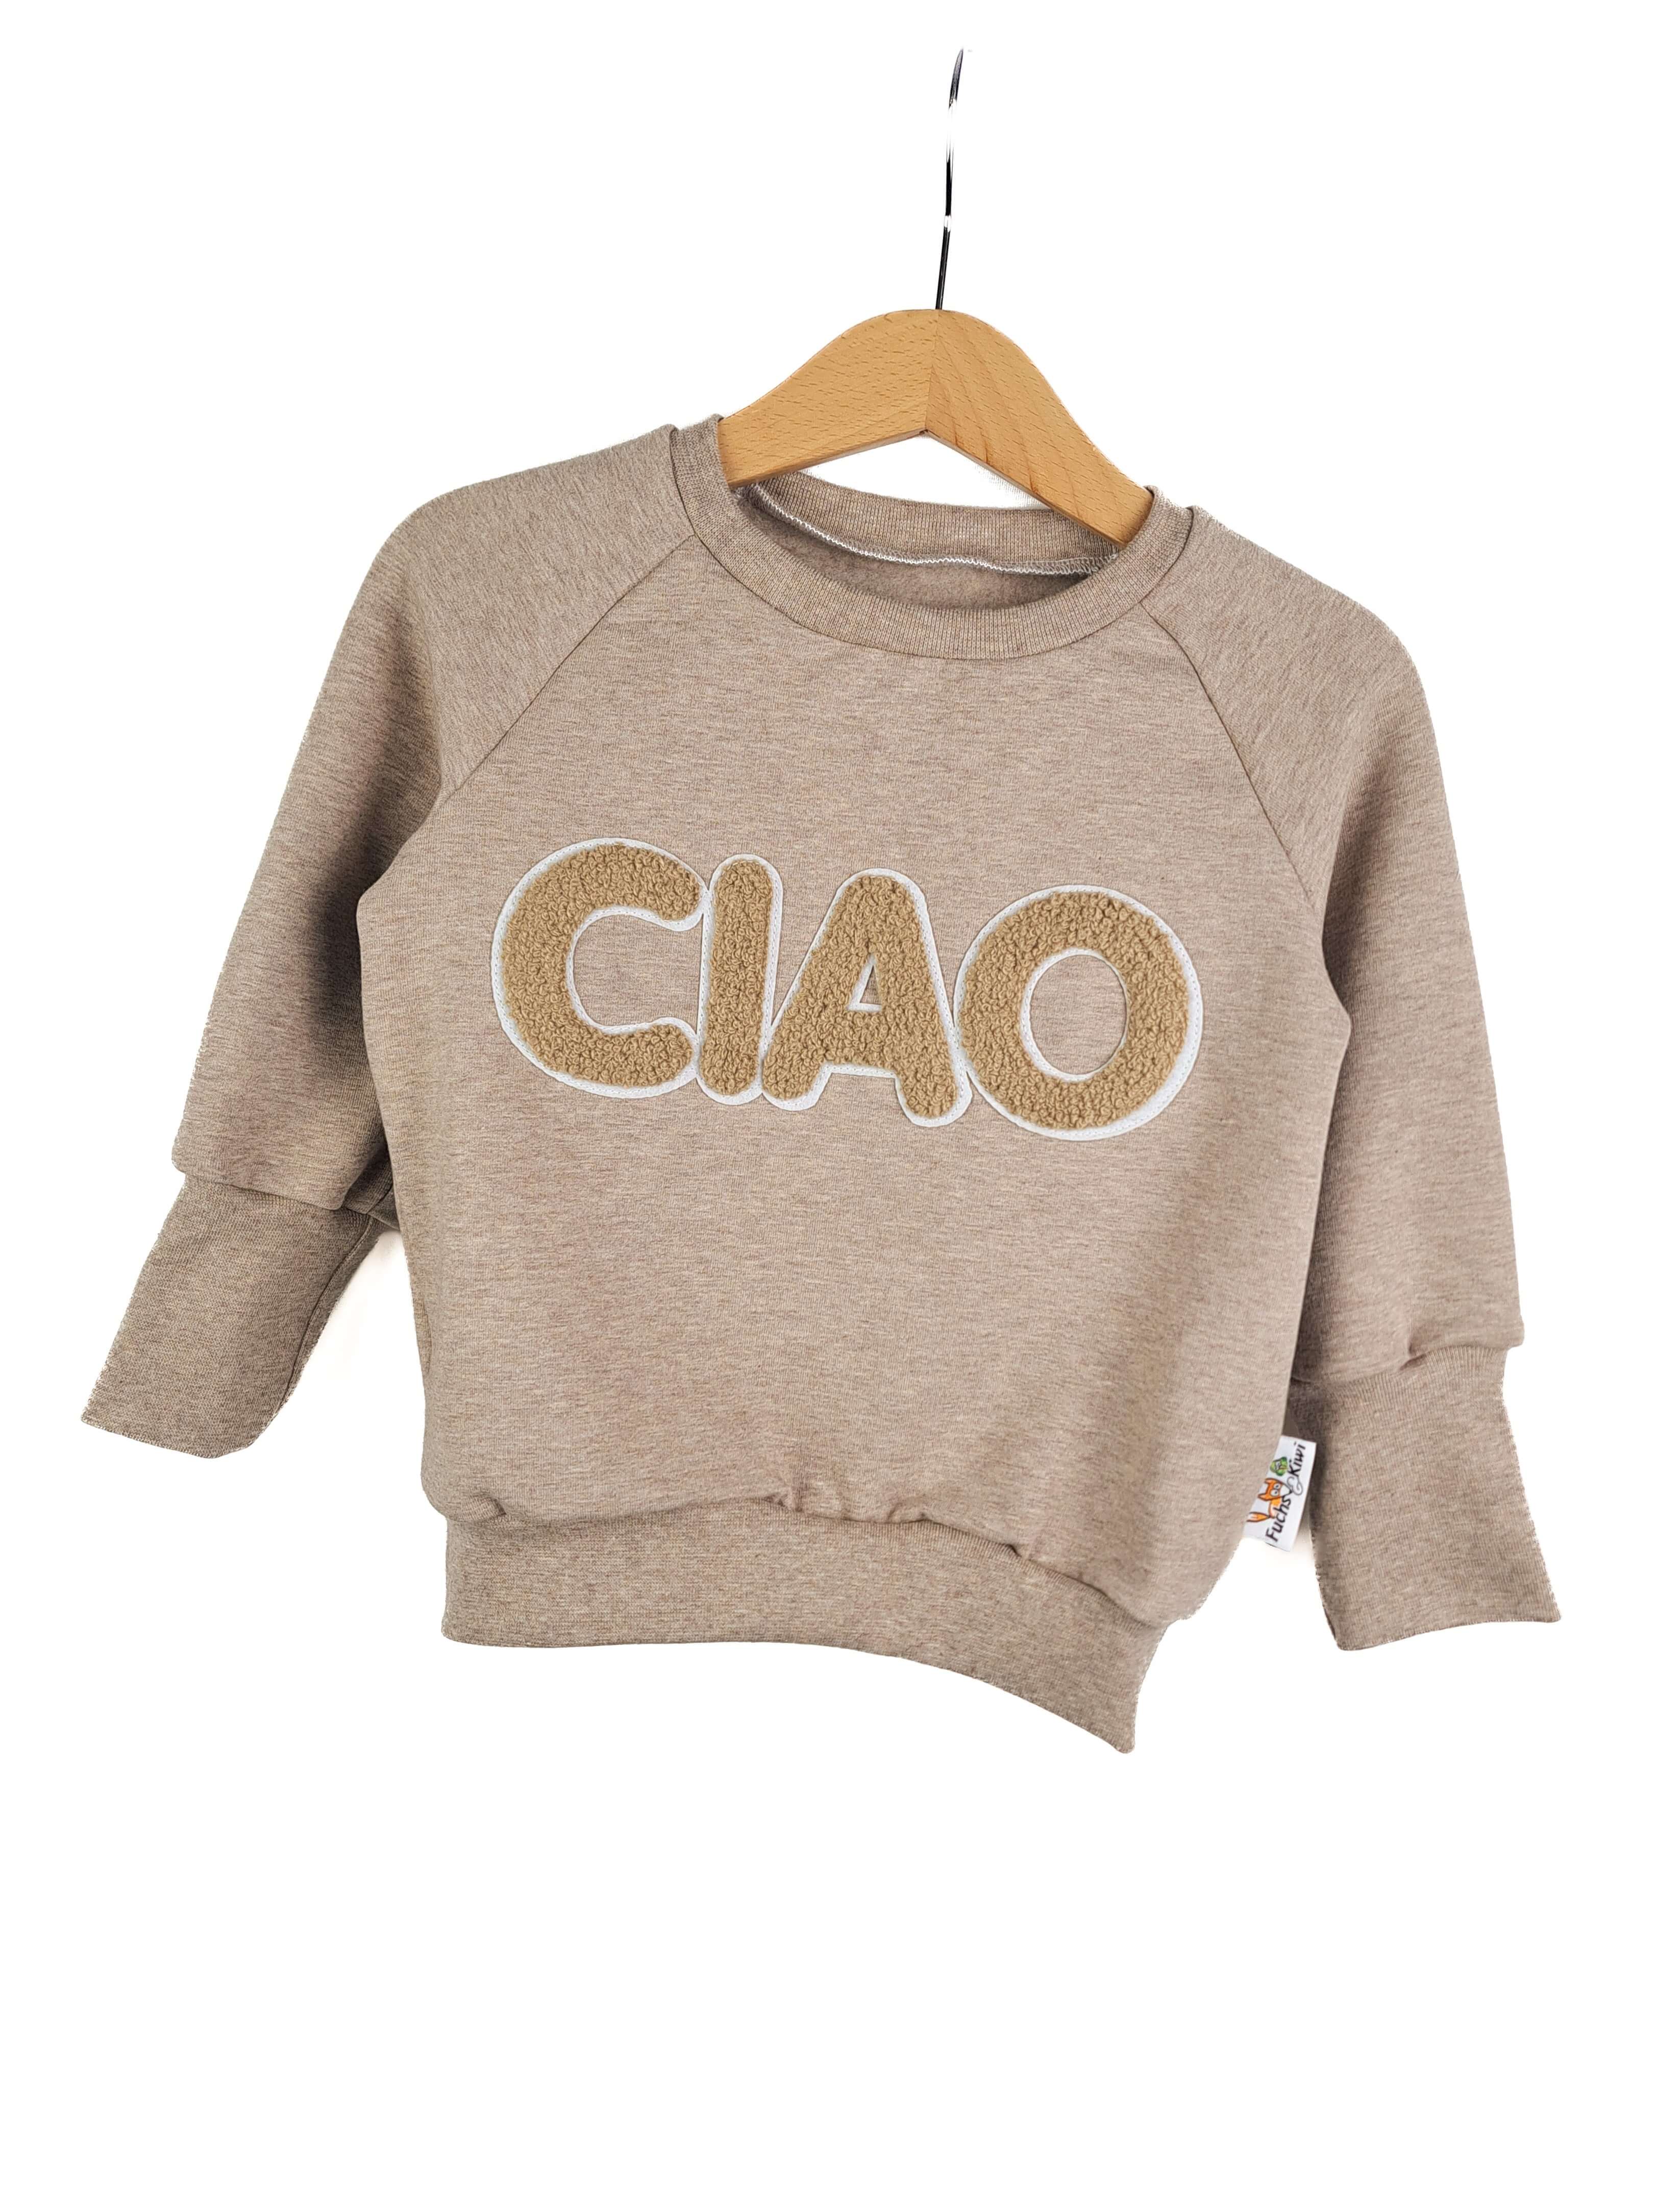 Pullover CIAO-Patch sand